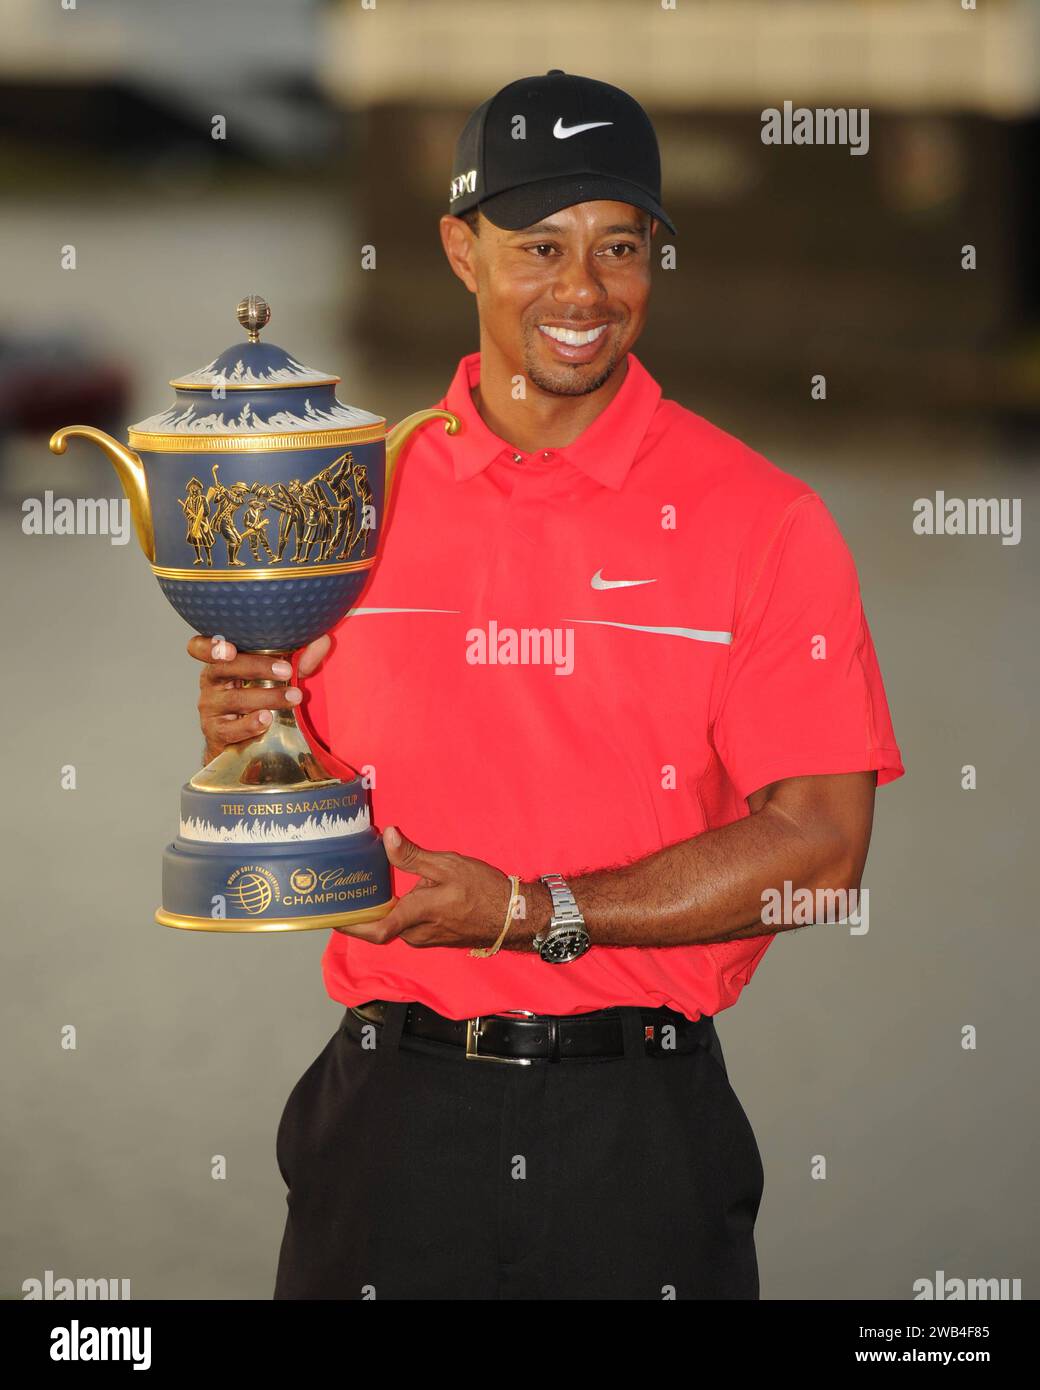 **FILE PHOTO** Tiger Woods and Nike End 27 Year Partnership. MIAMI, FL - MARCH 10: Tiger Woods celebrates during Final Round of the WGC-Cadillac Championship at the Trump Doral Golf Resort & Spa on March 10, 2013 in Miami, Florida. Copyright: xmpi04/MediaPunchx Stock Photo